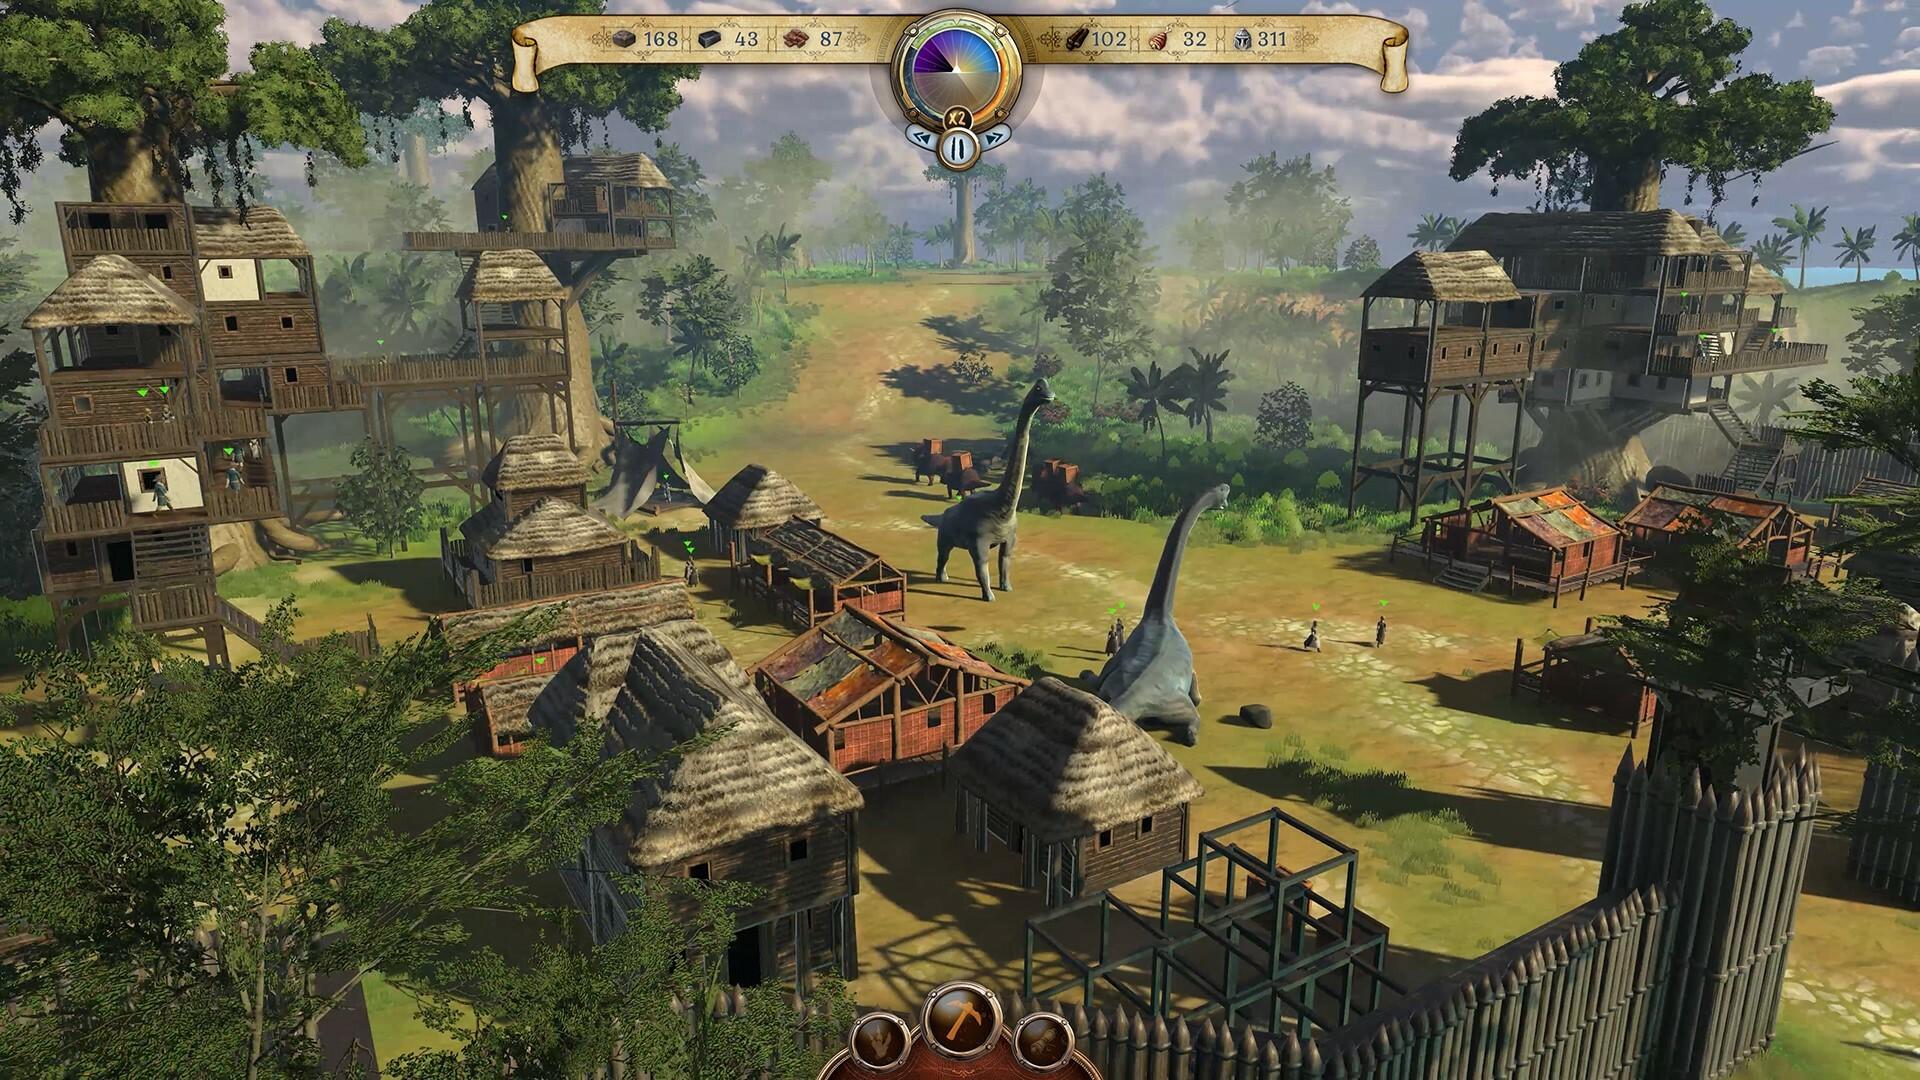 Screenshot 1 of Shipwrecked: Lost Colony 